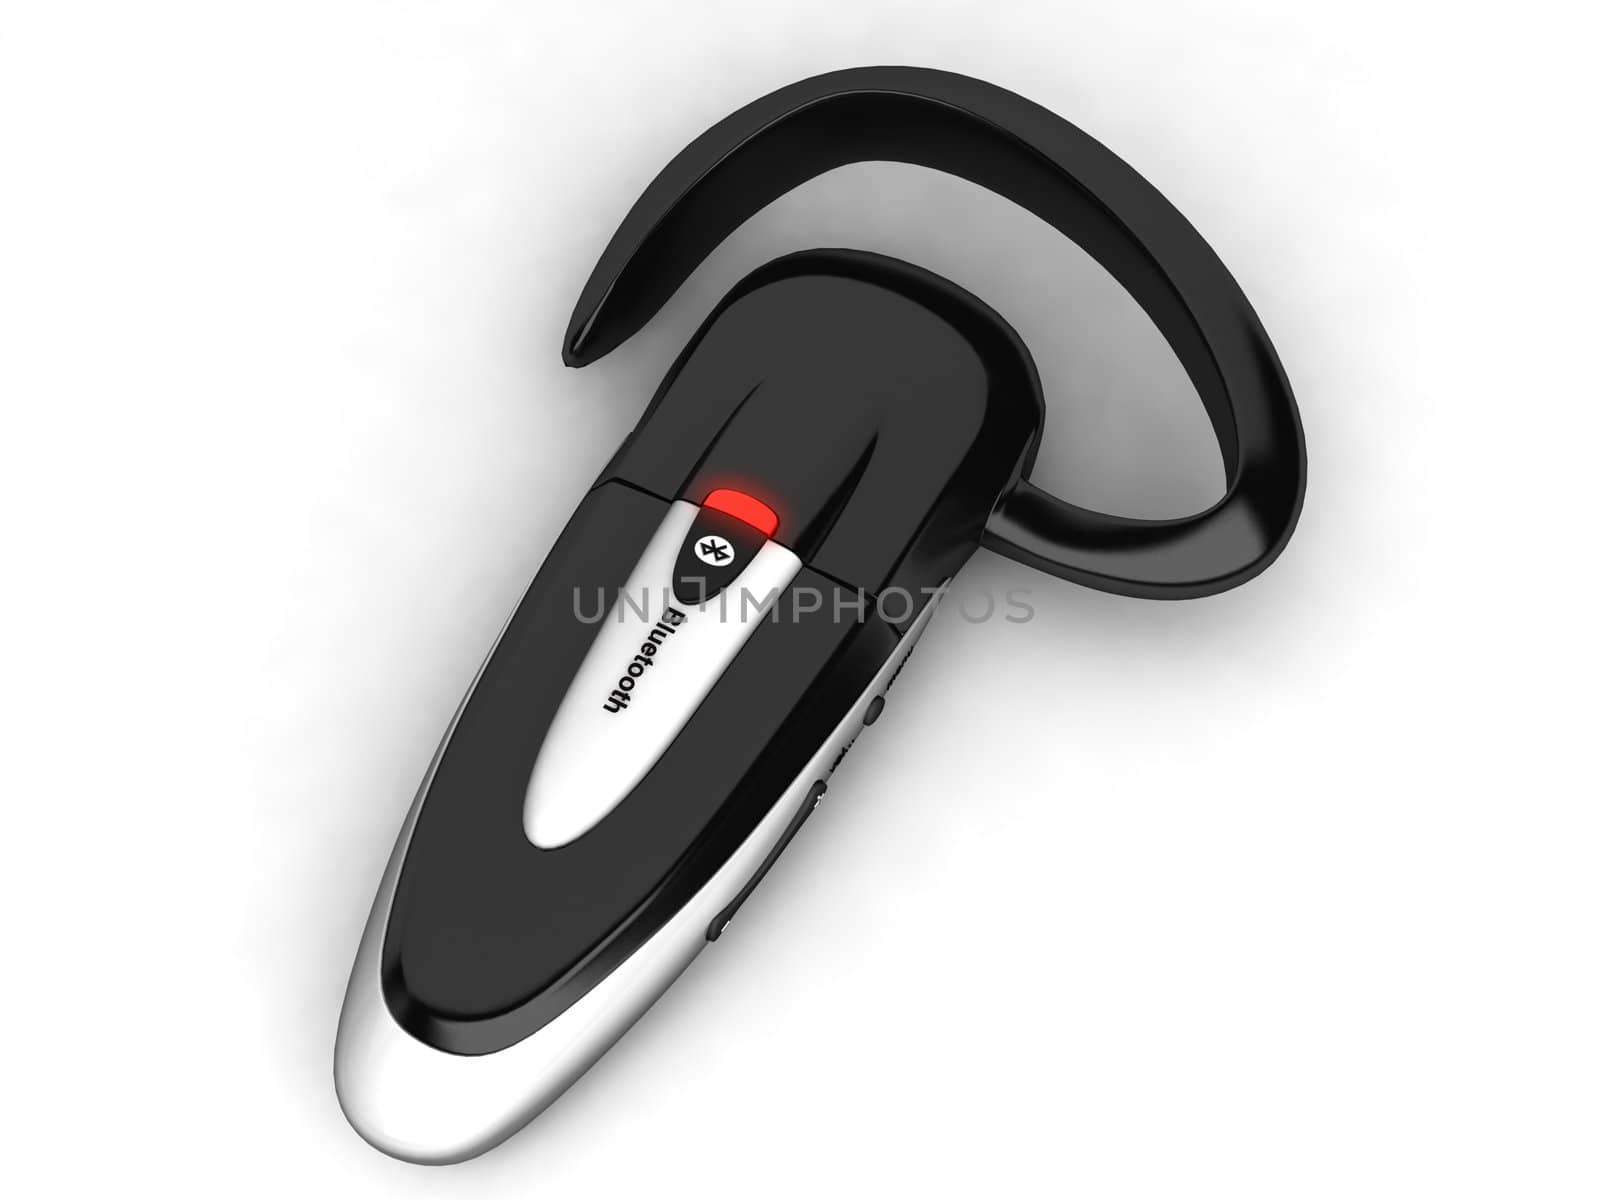 bluetooth handsfree device by imagerymajestic